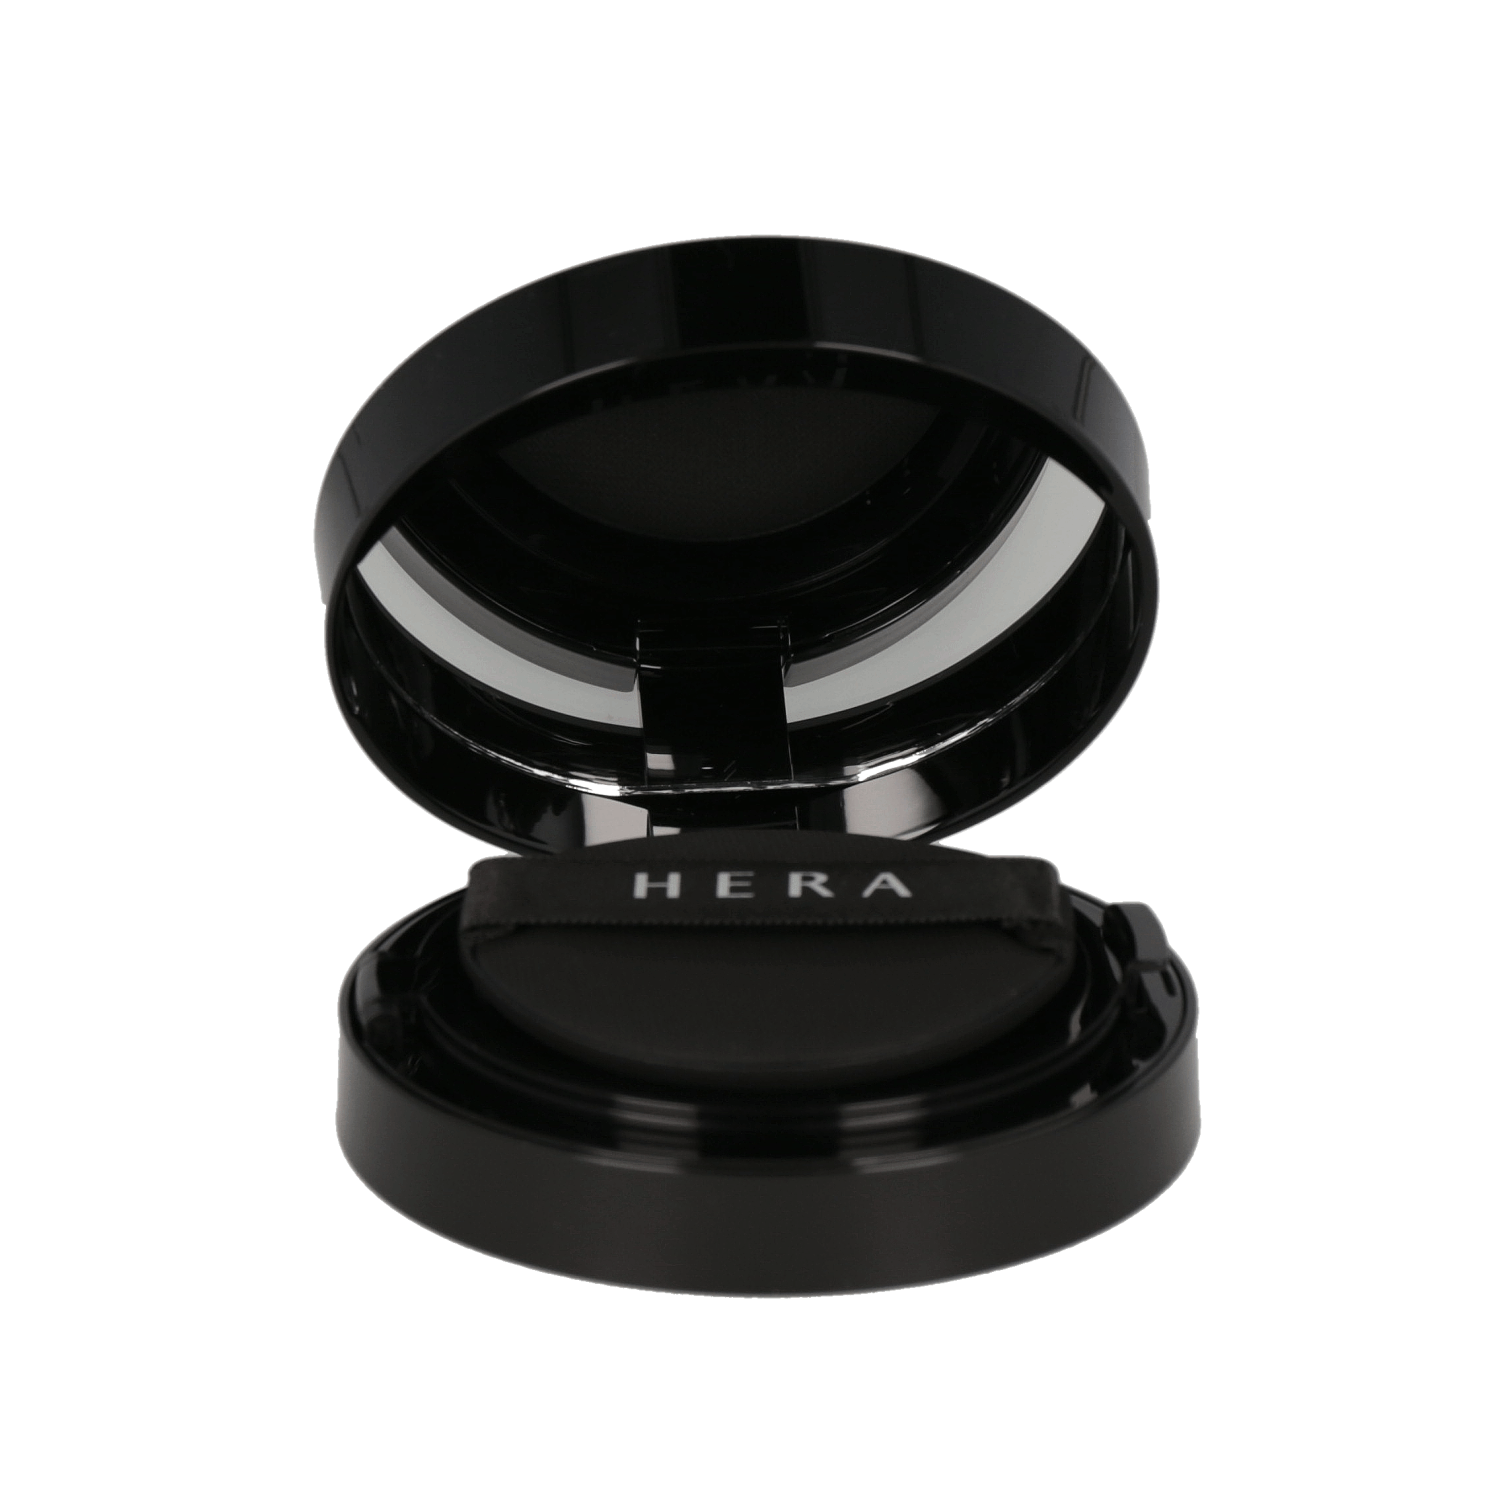 PA++ 15g x 2EA by HERA, with original and refill for convenience.